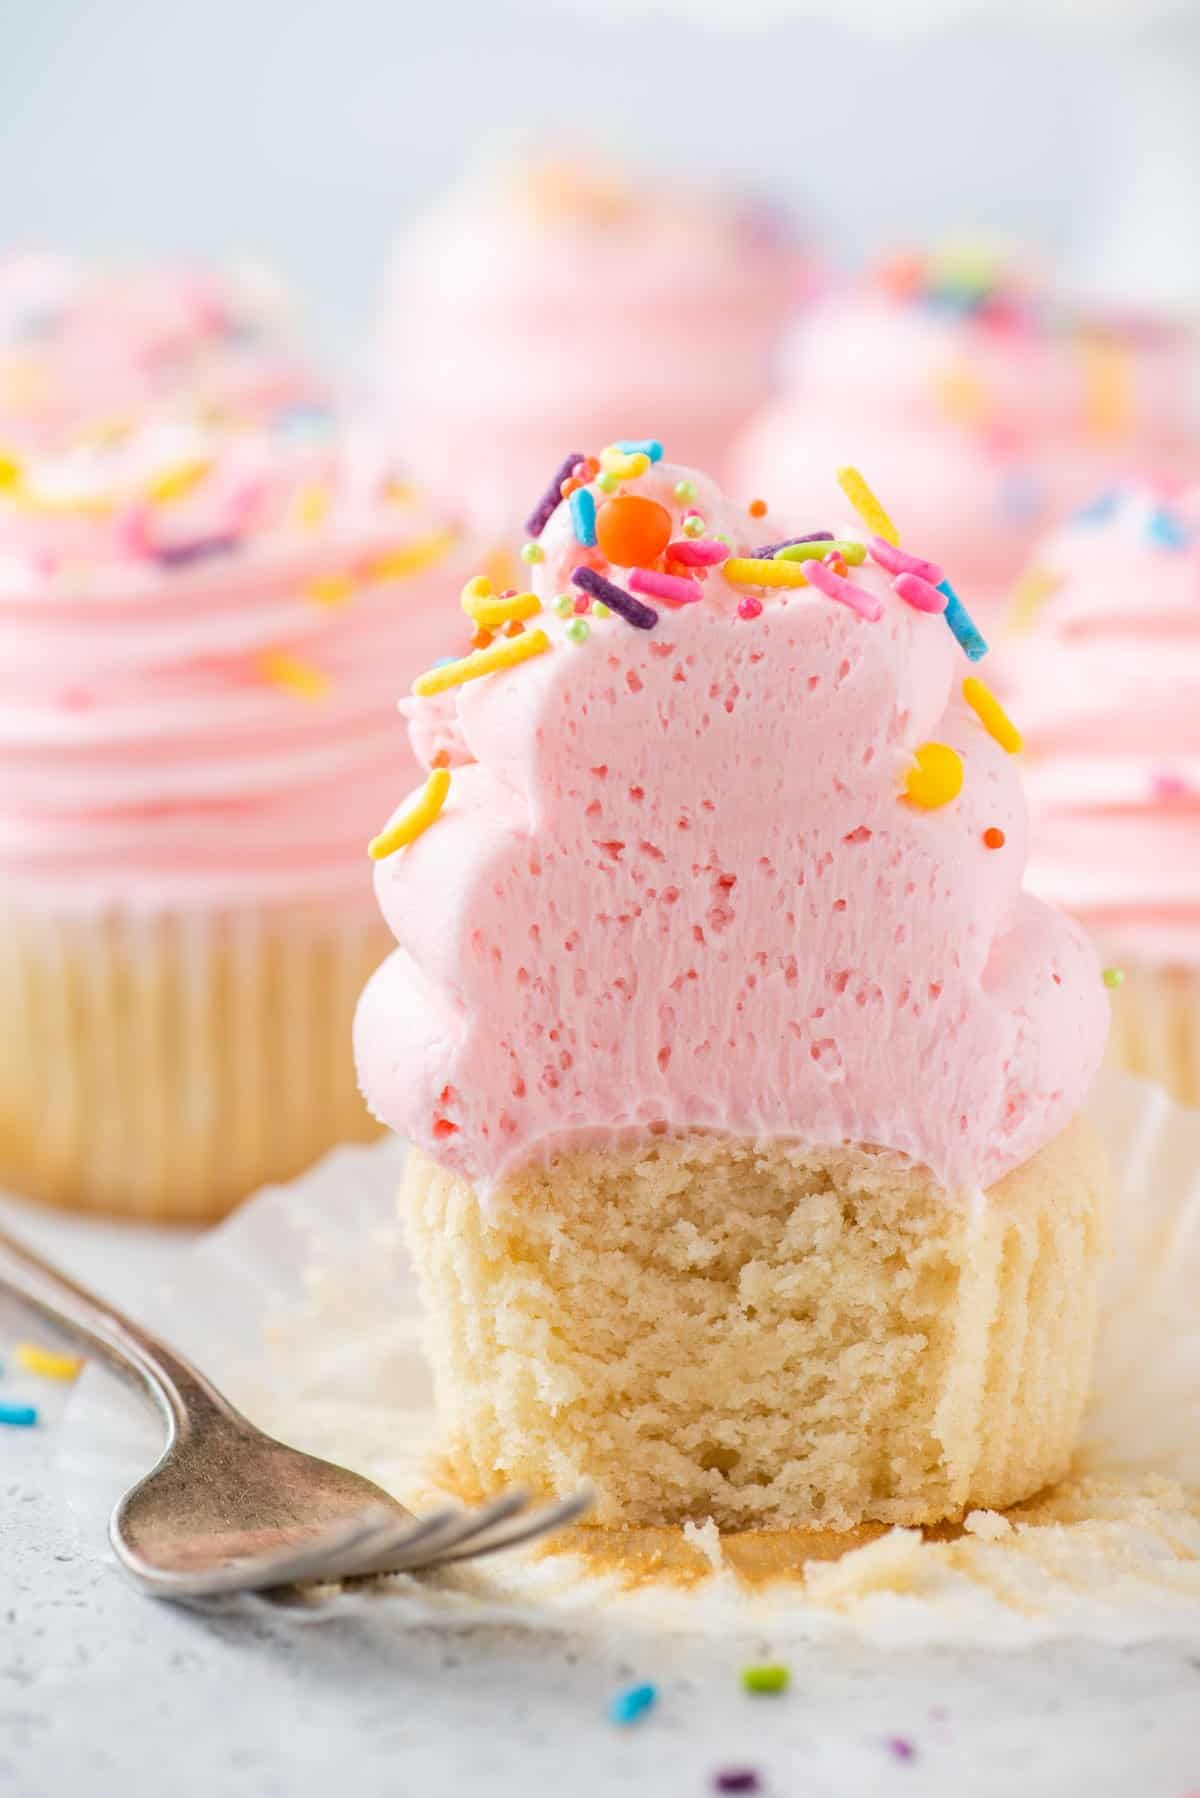 Gluten-free cupcake with bite taken out to show fluffy texture